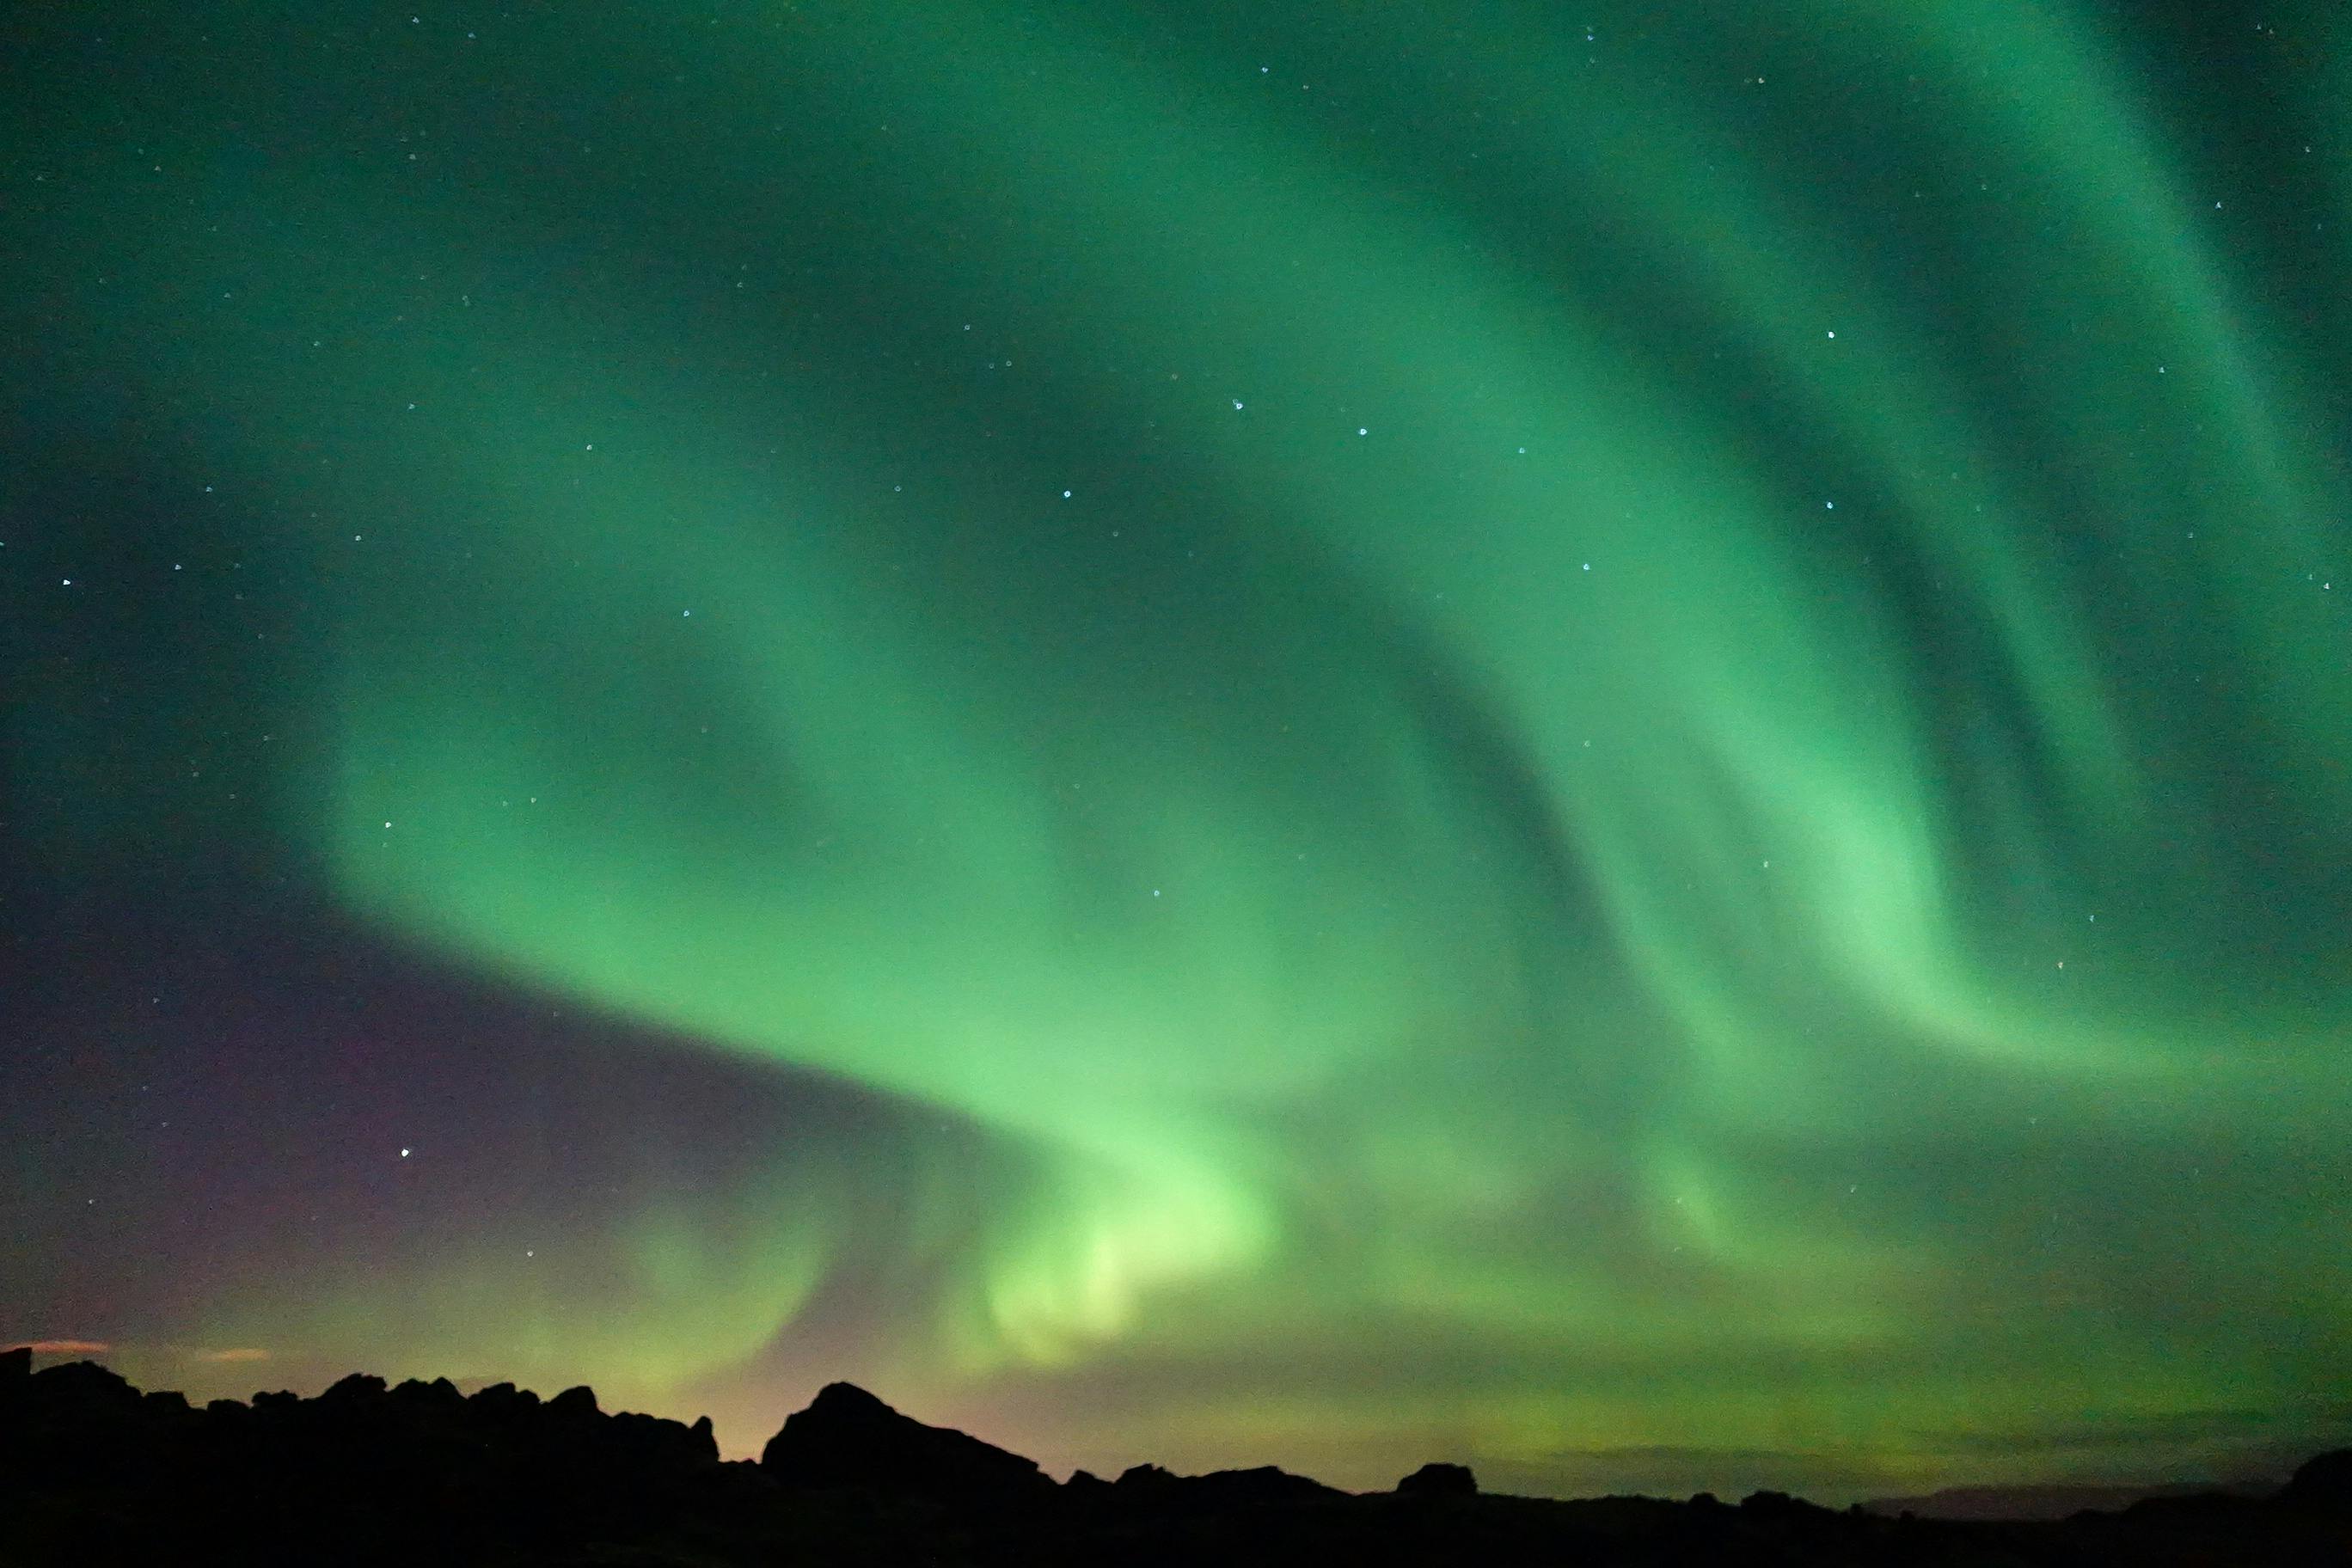  Northern Lights Private Tour - Up to 9 passengers